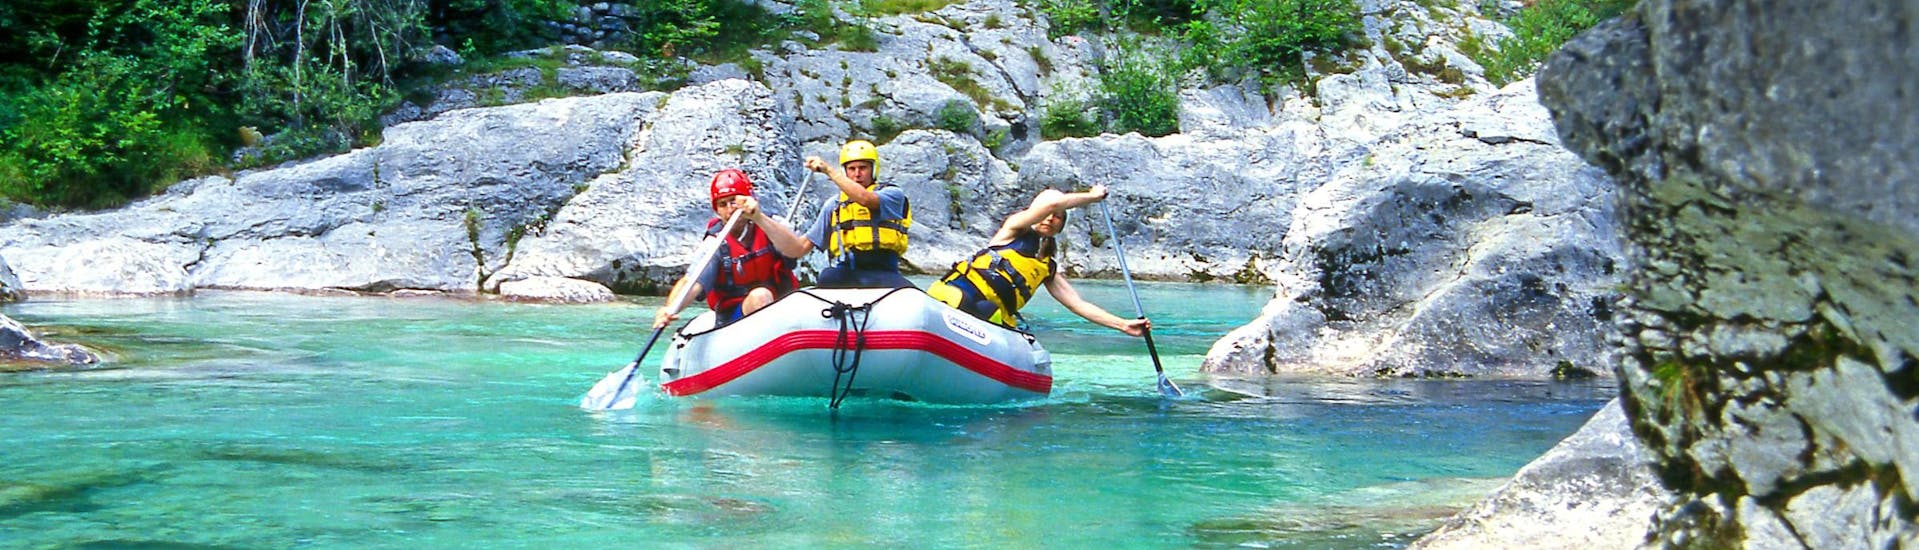 A group of young people enjoying some white water rafting fun in the rafting & canyoning hotspot of Sušec.